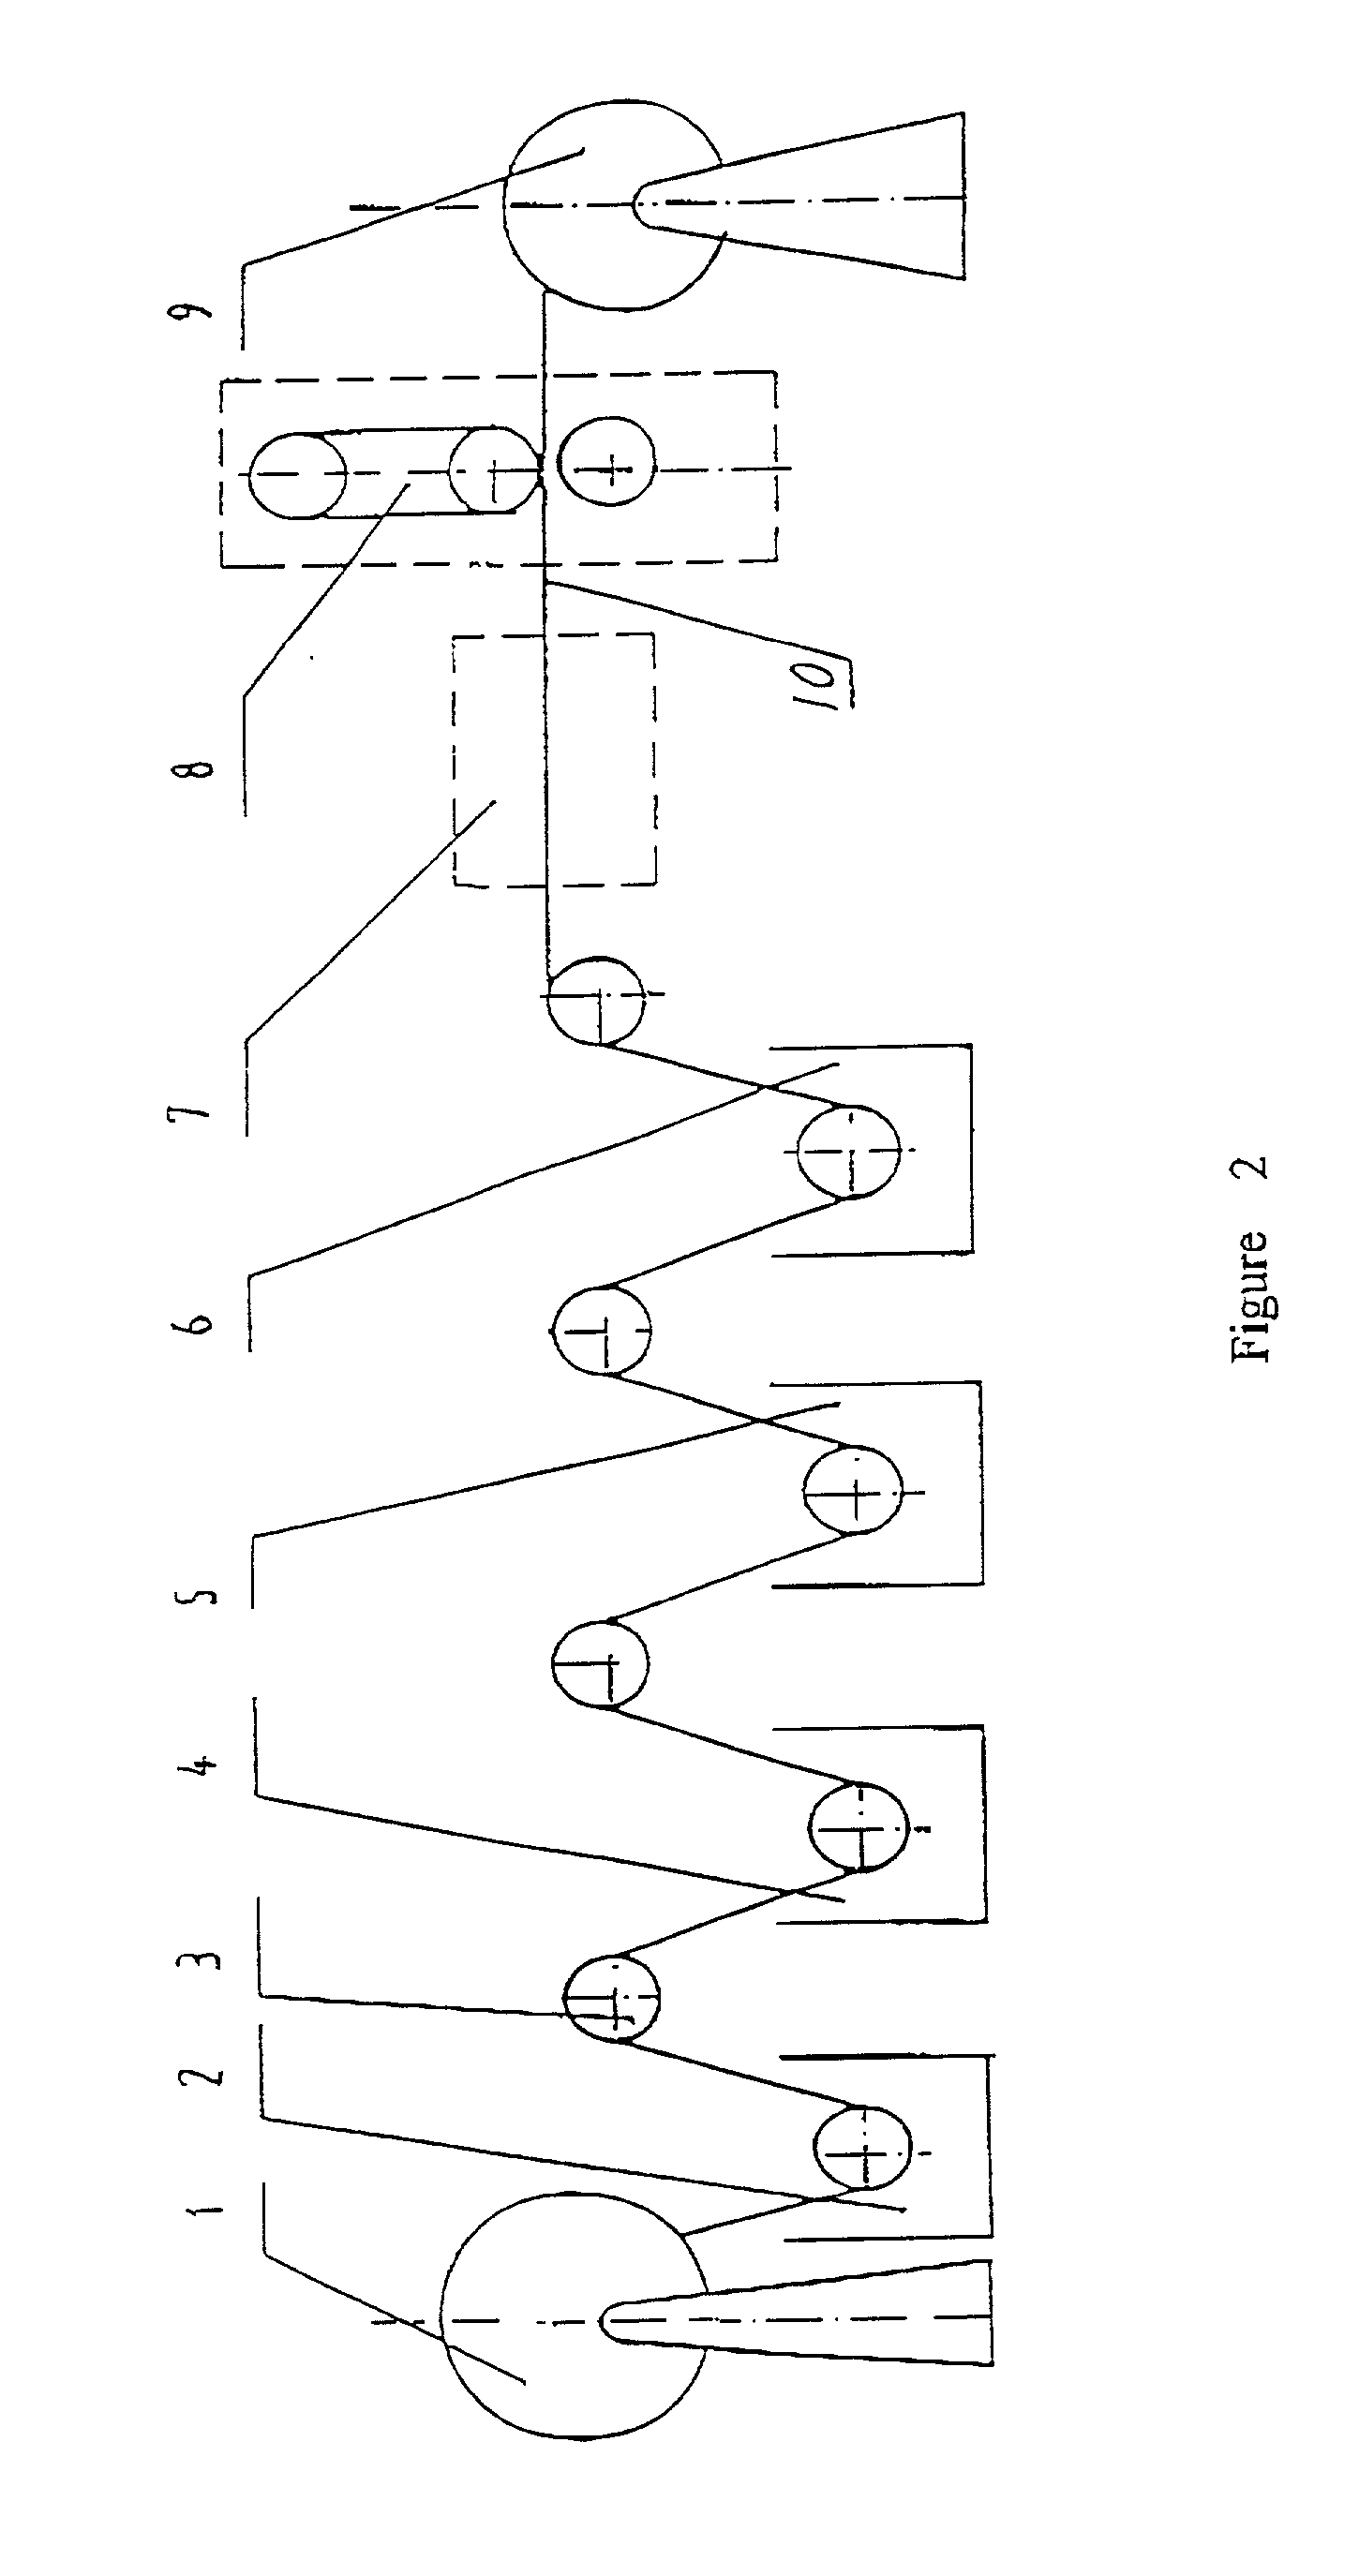 Liquid - solid rolling bonding method for different kinds of metals and the apparatus therefor